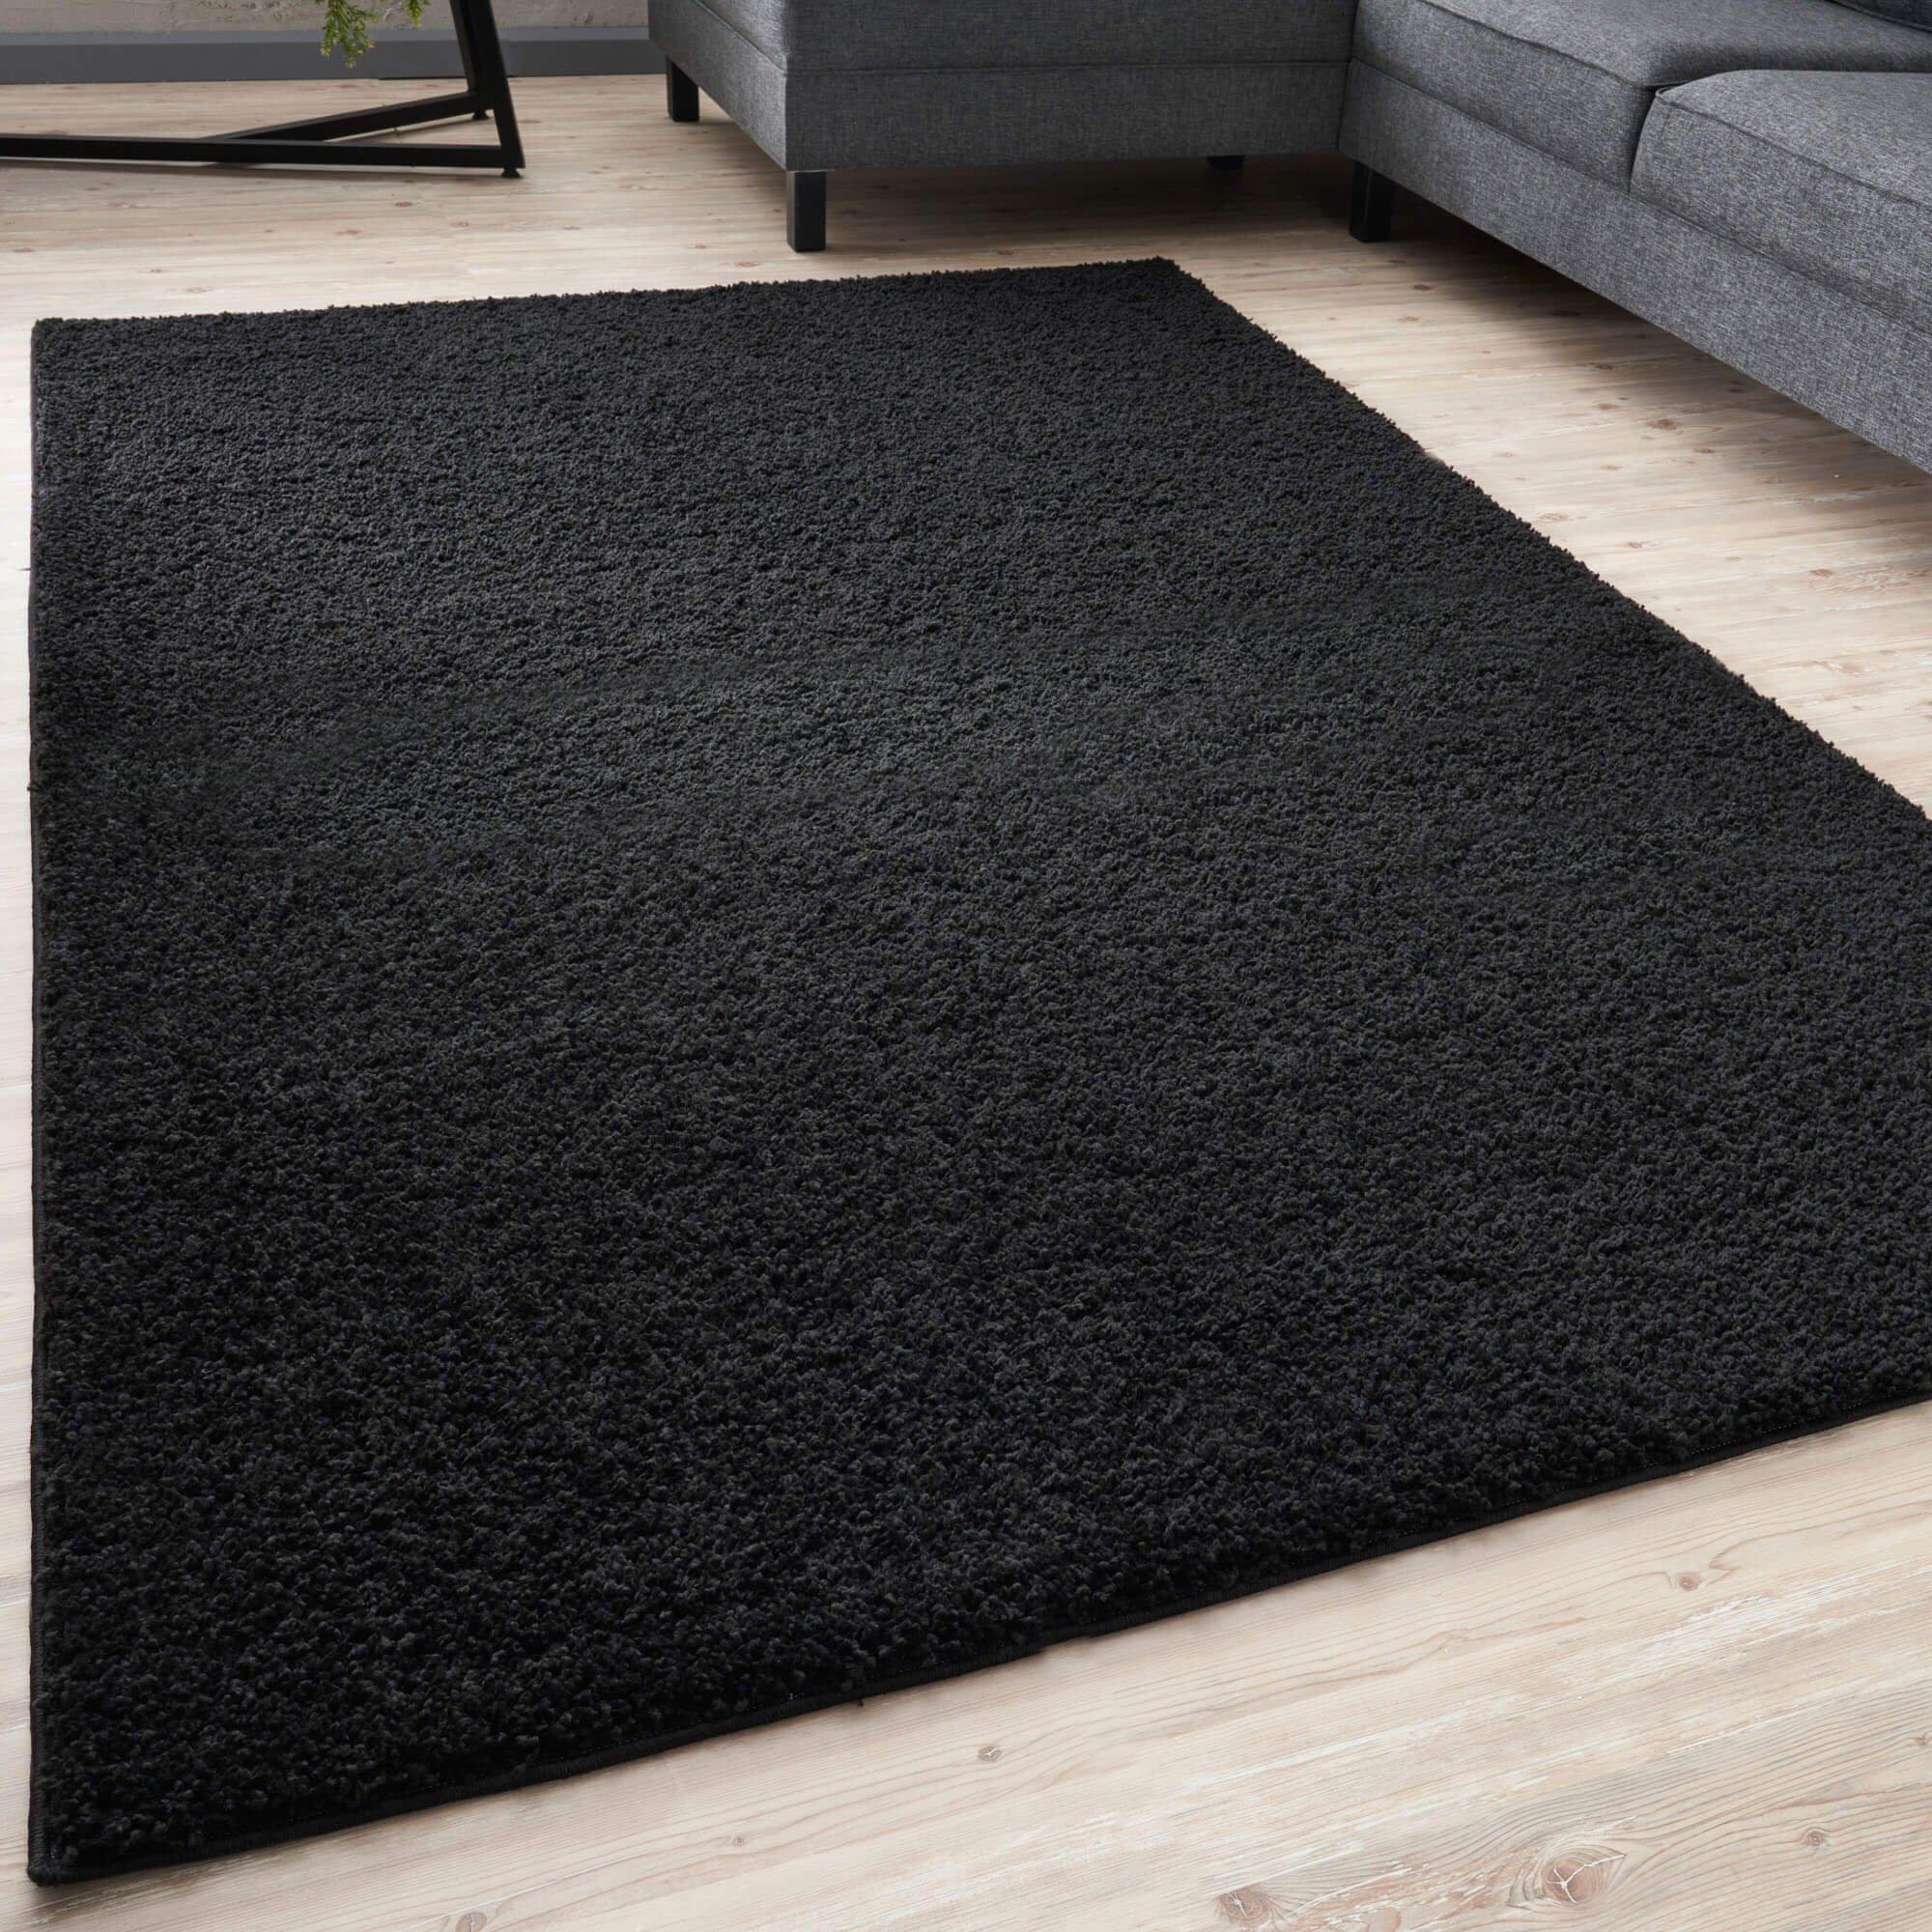 Myshaggy Collection Rugs Solid Design in Black